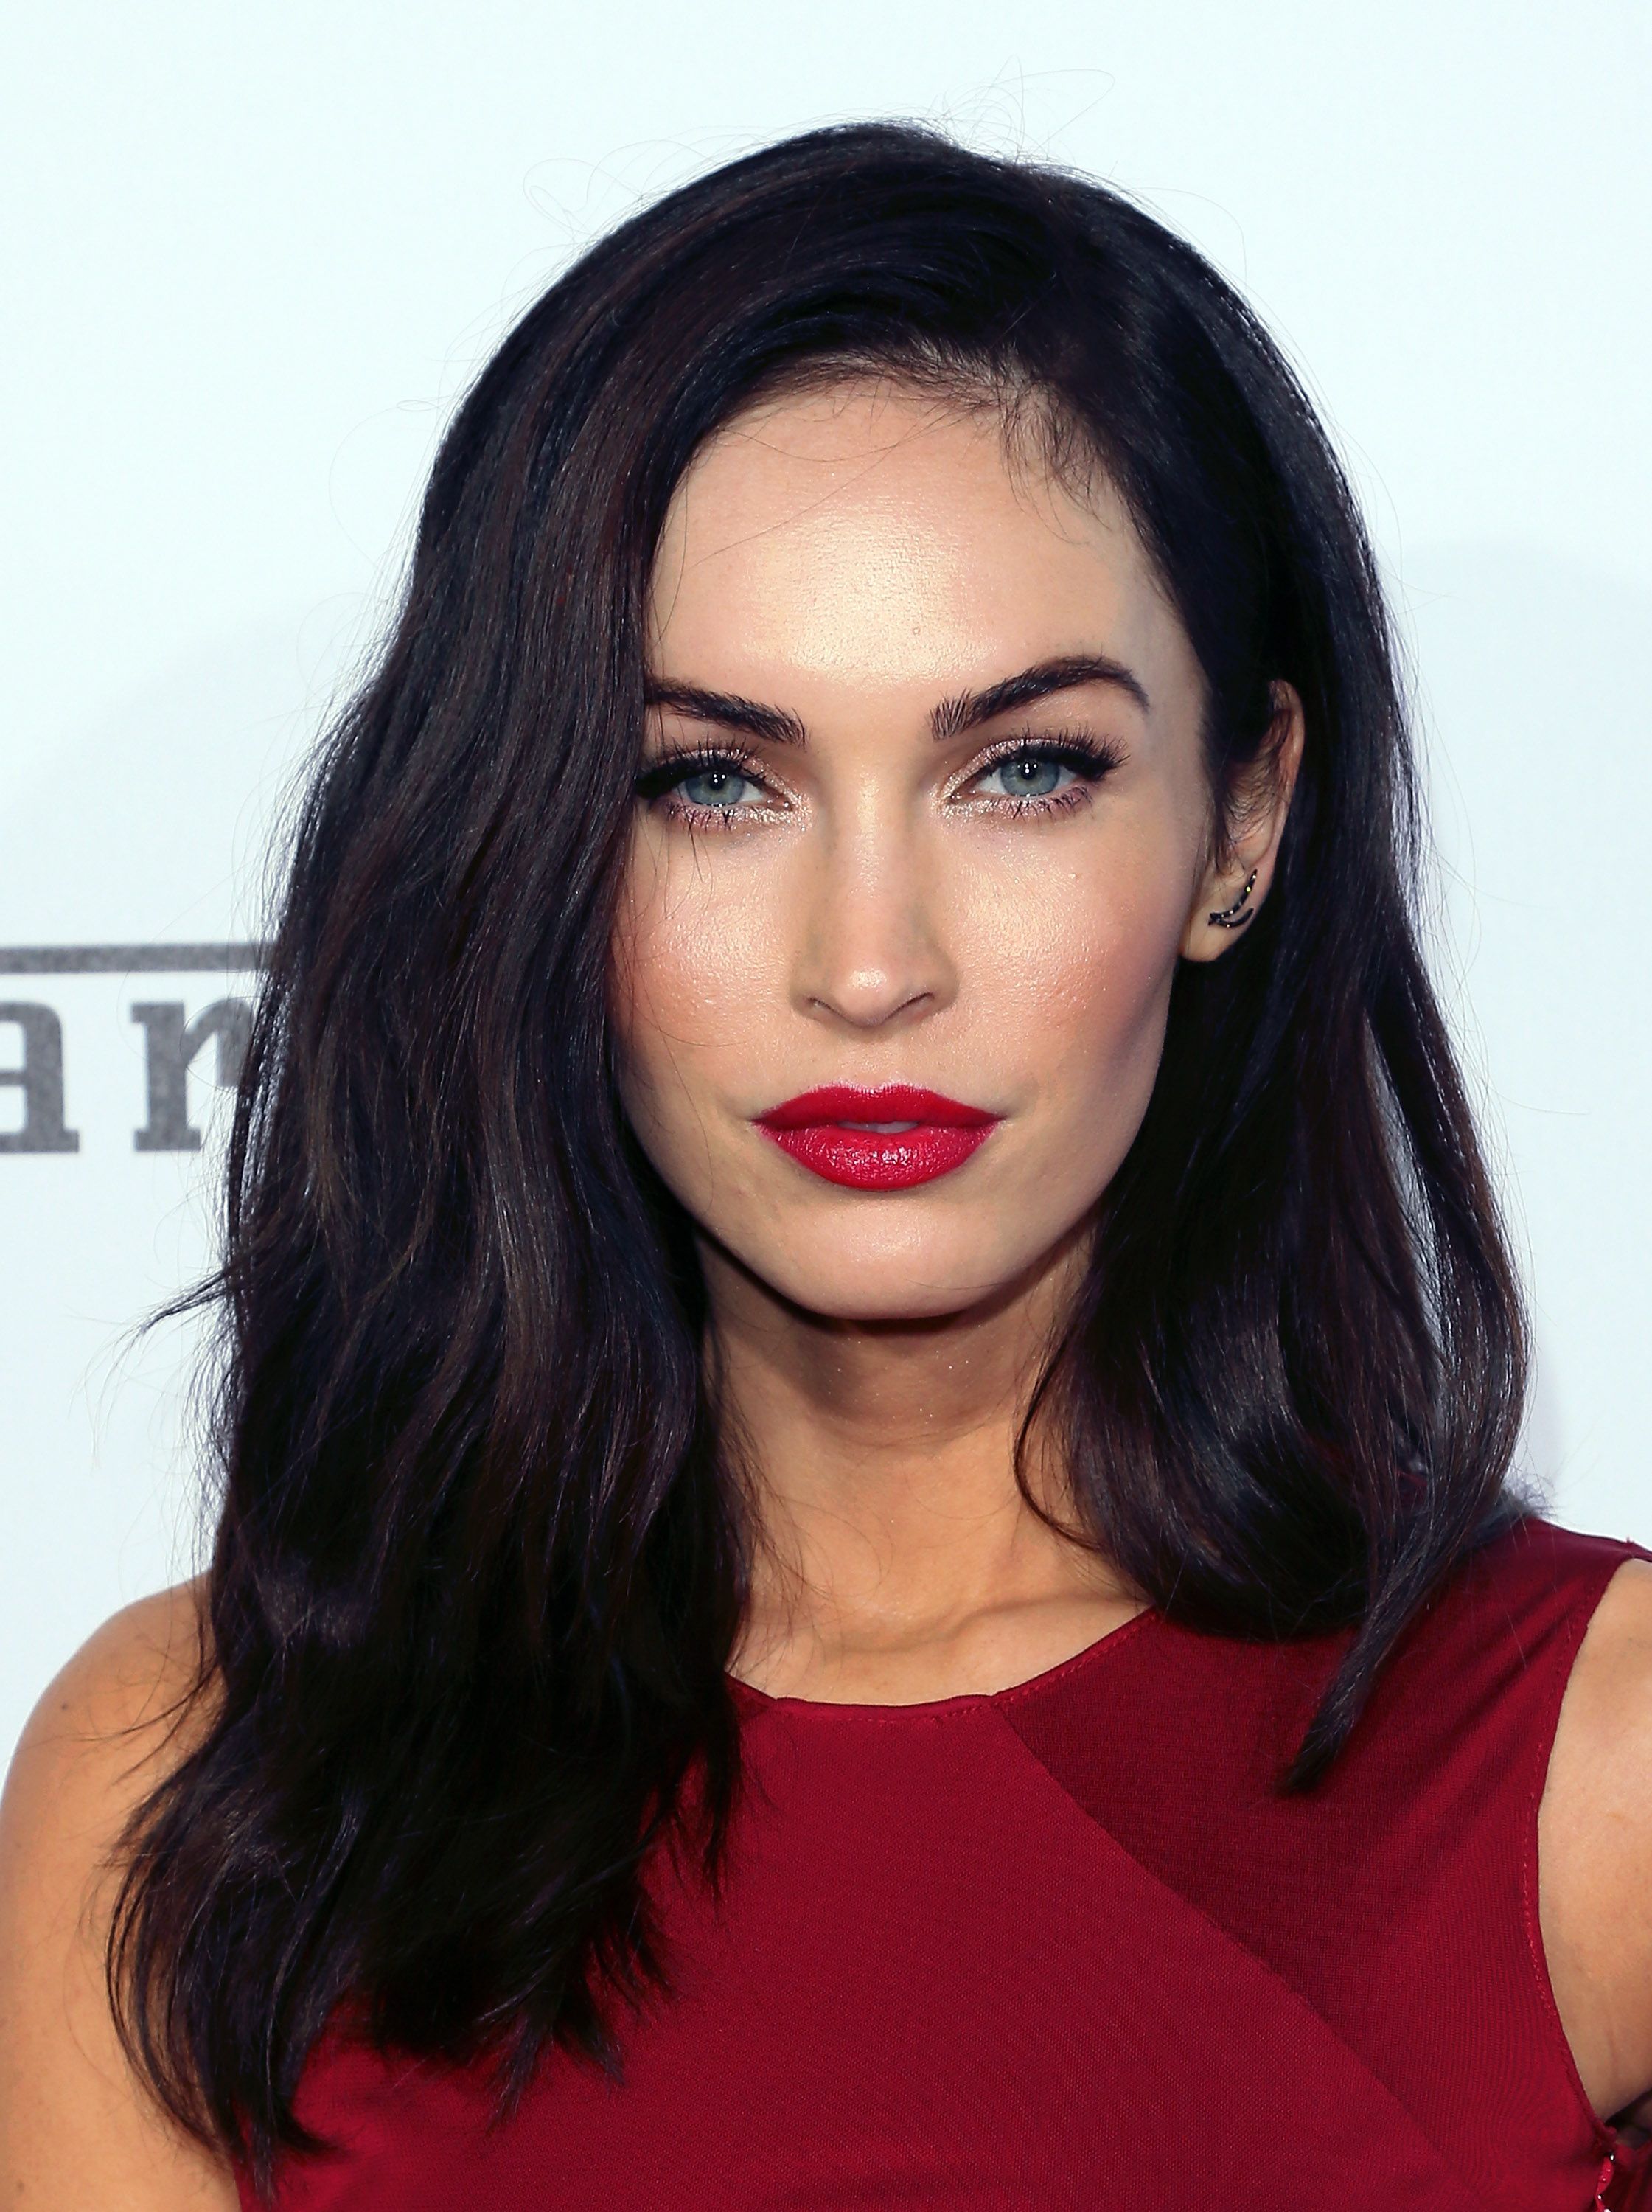 Megan Fox Transformers Porn Sex - Megan Fox Is an Original DGAF Celebrity and It's Time She Gets Your Respect